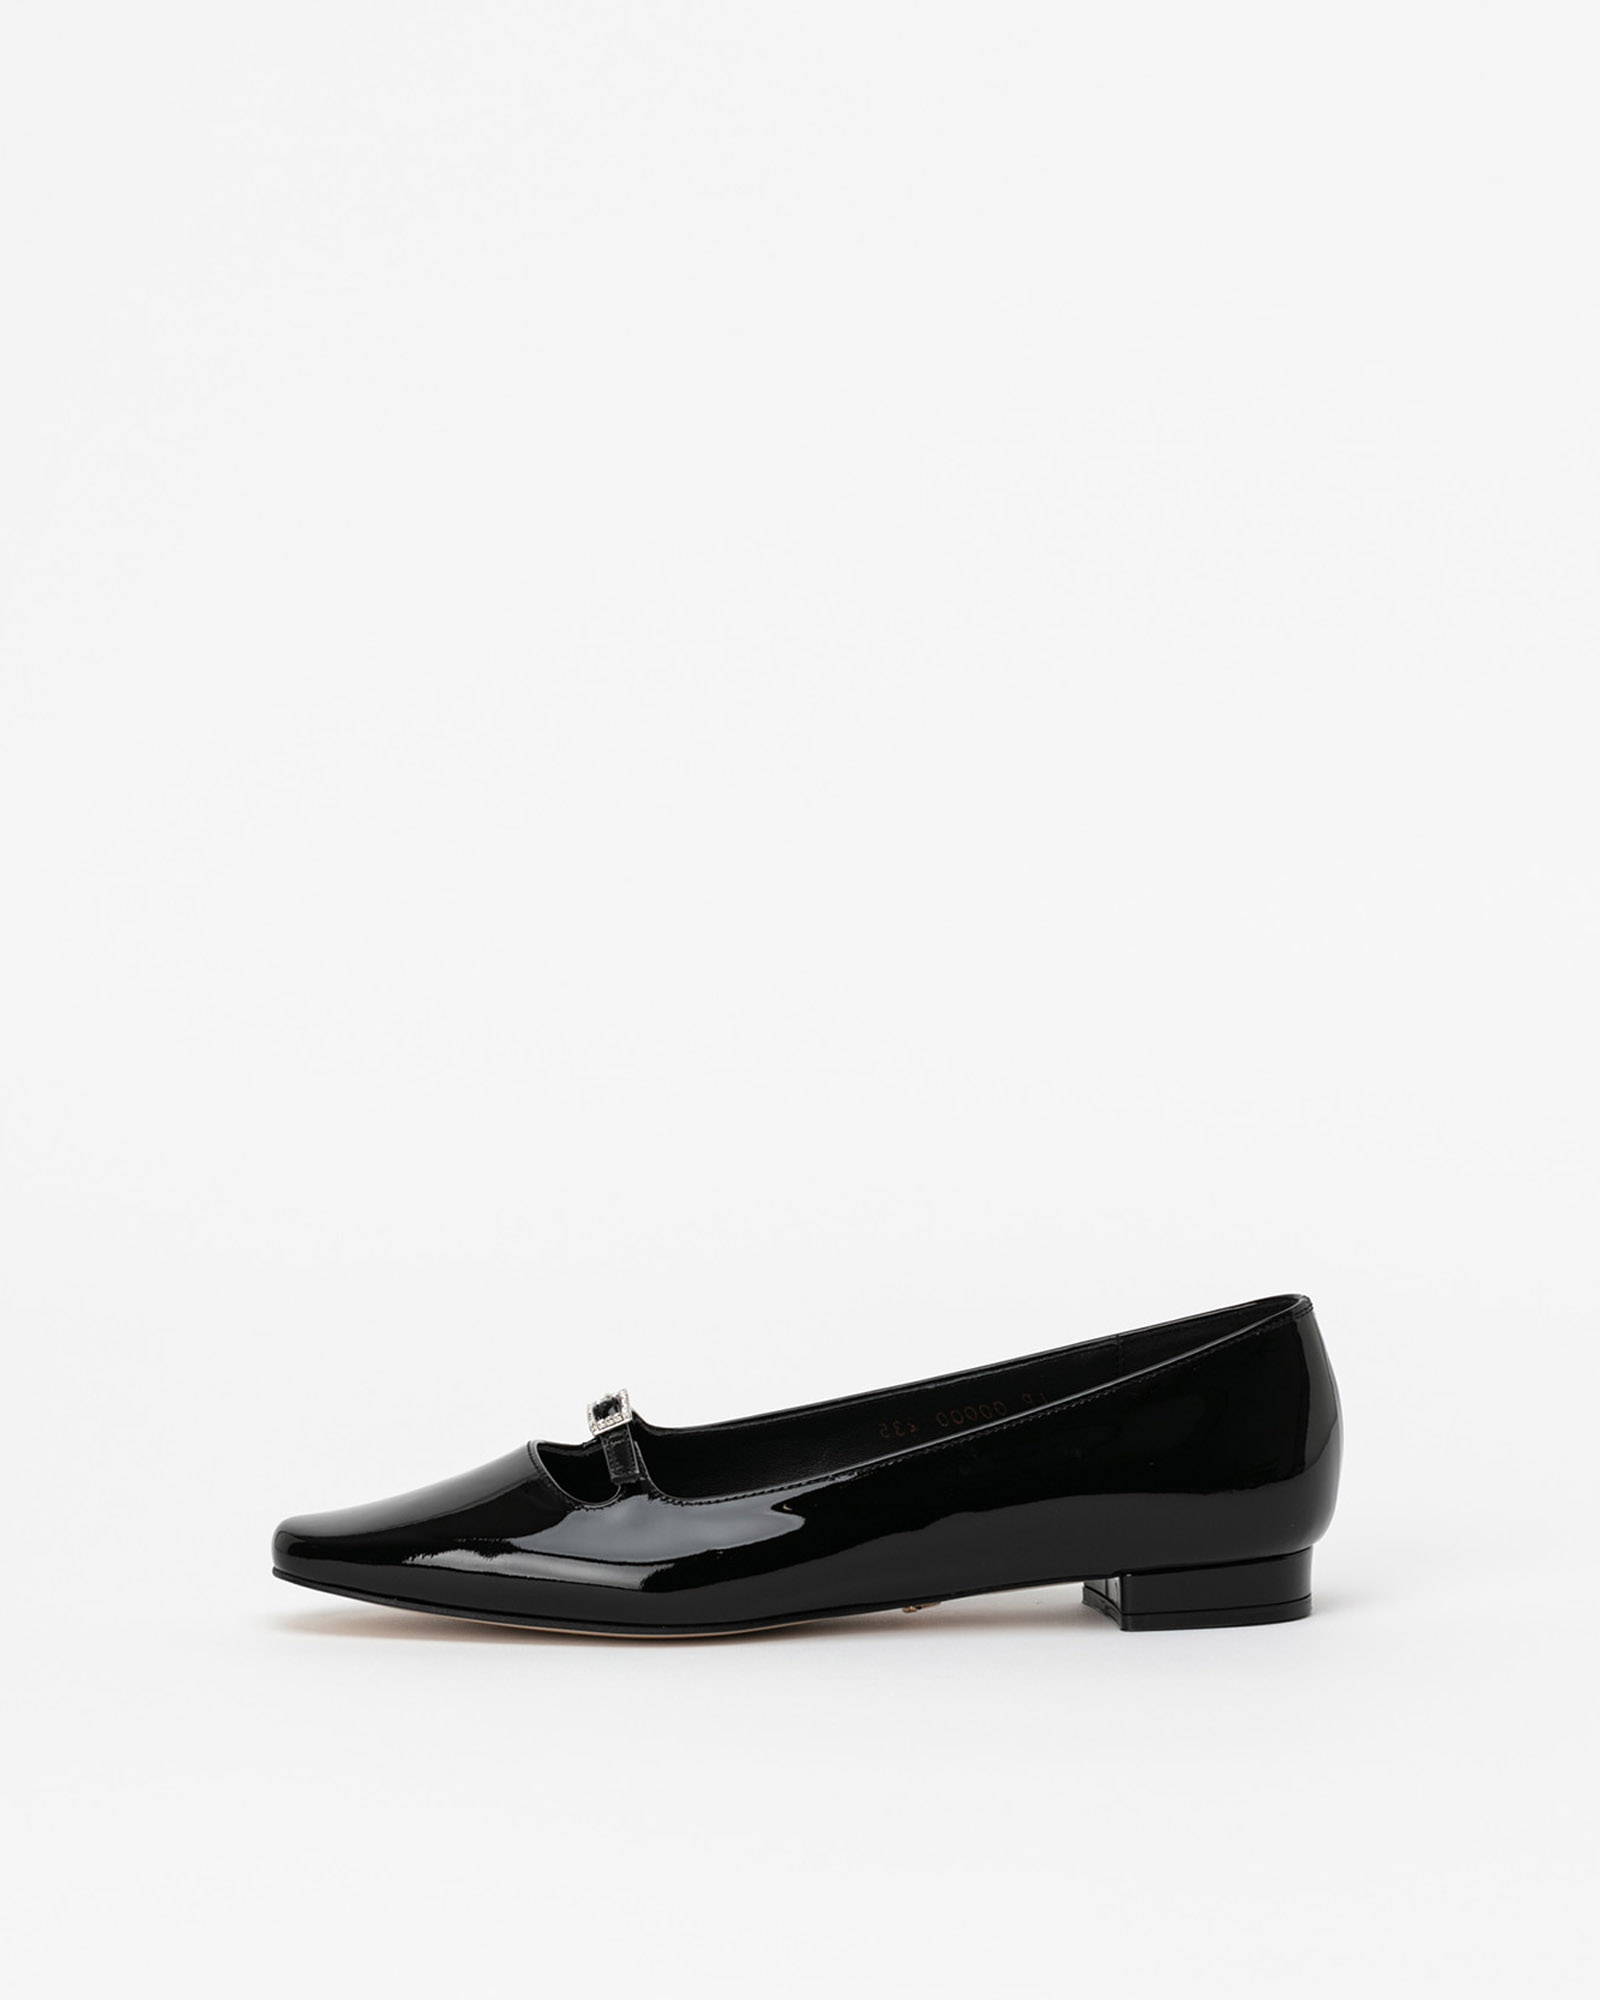 Contralto Embellished Flat Shoes in Black Patent